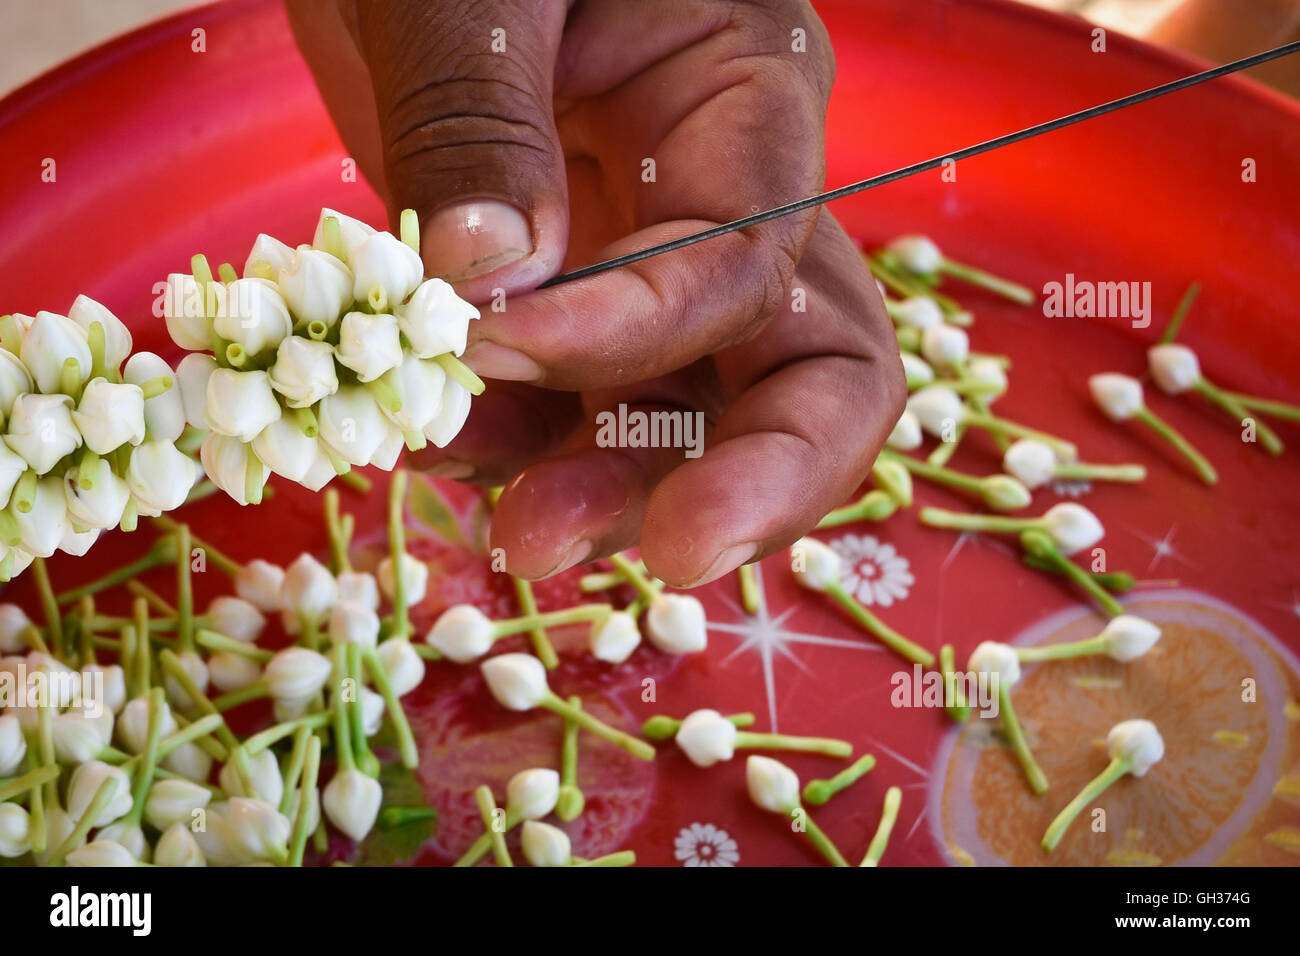 Jasmine garland of white needles garlands, flowers on Mother's Day Stock Photo